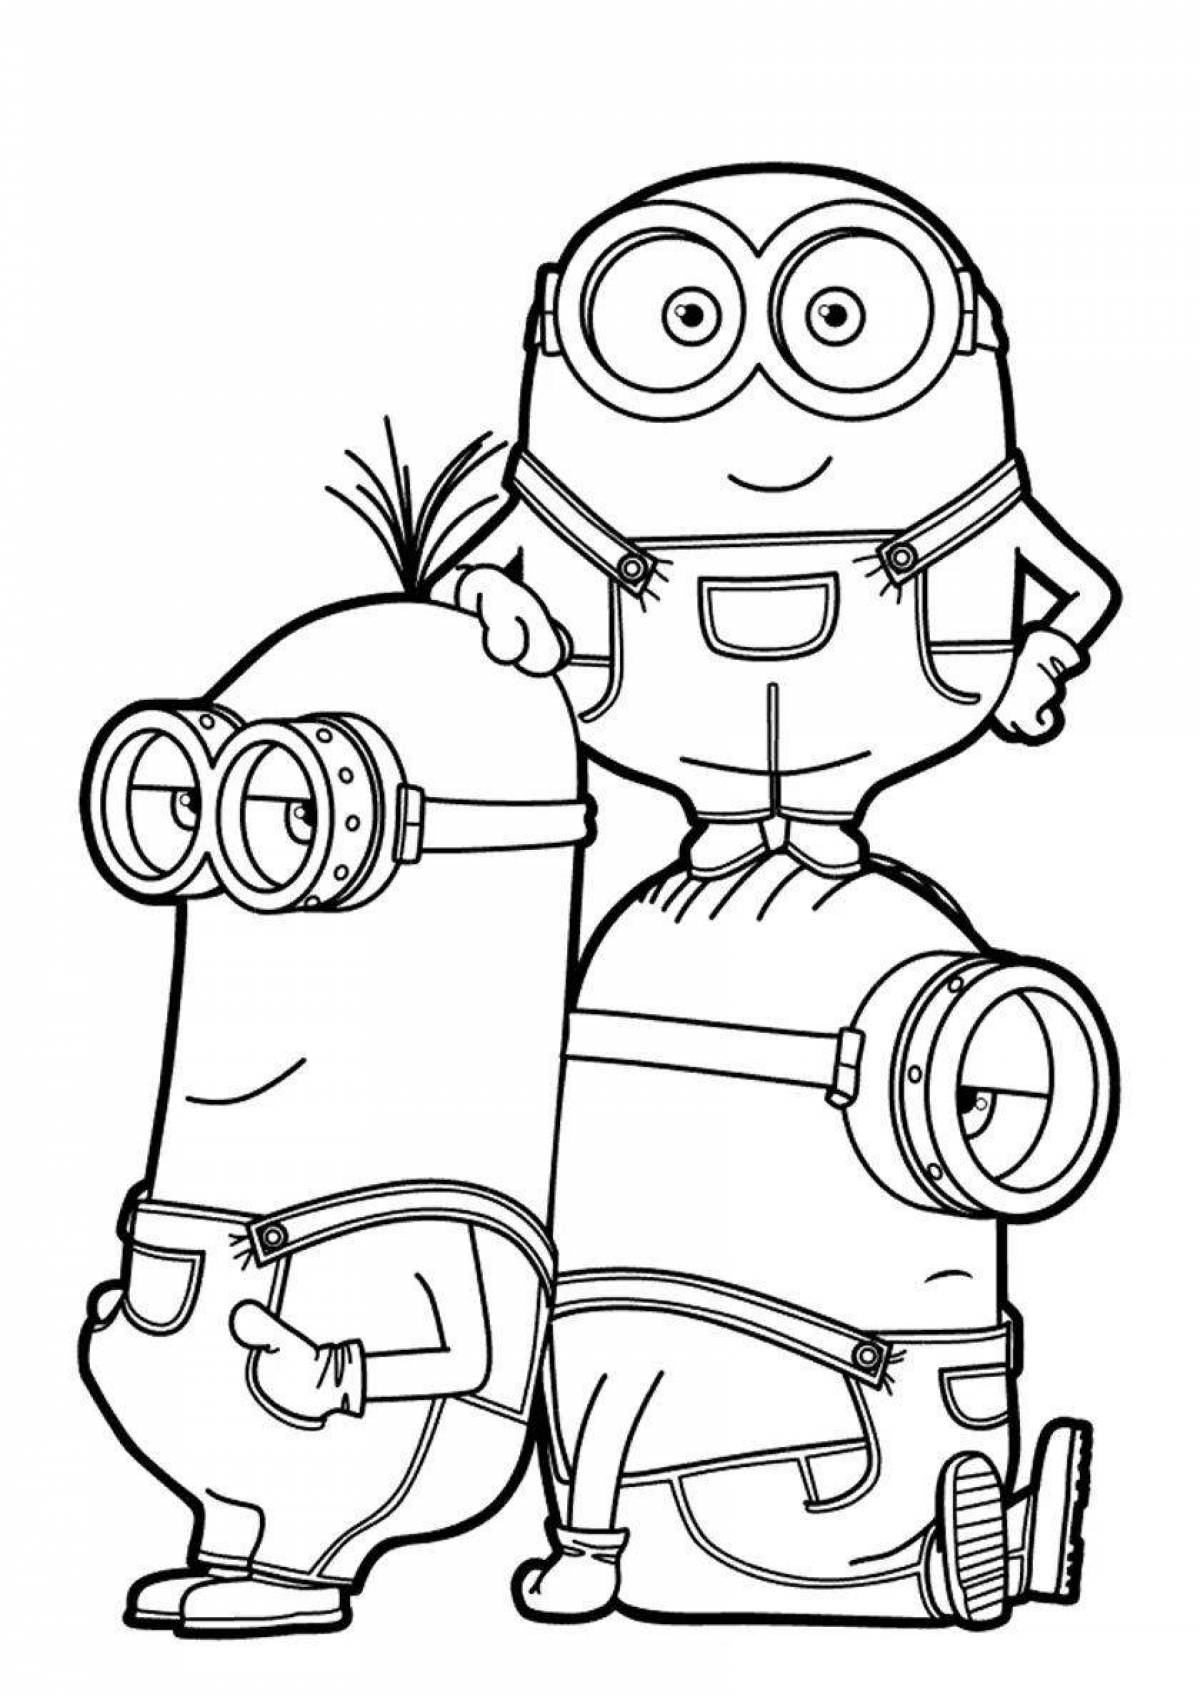 Coloring book fabulous kevin the minion